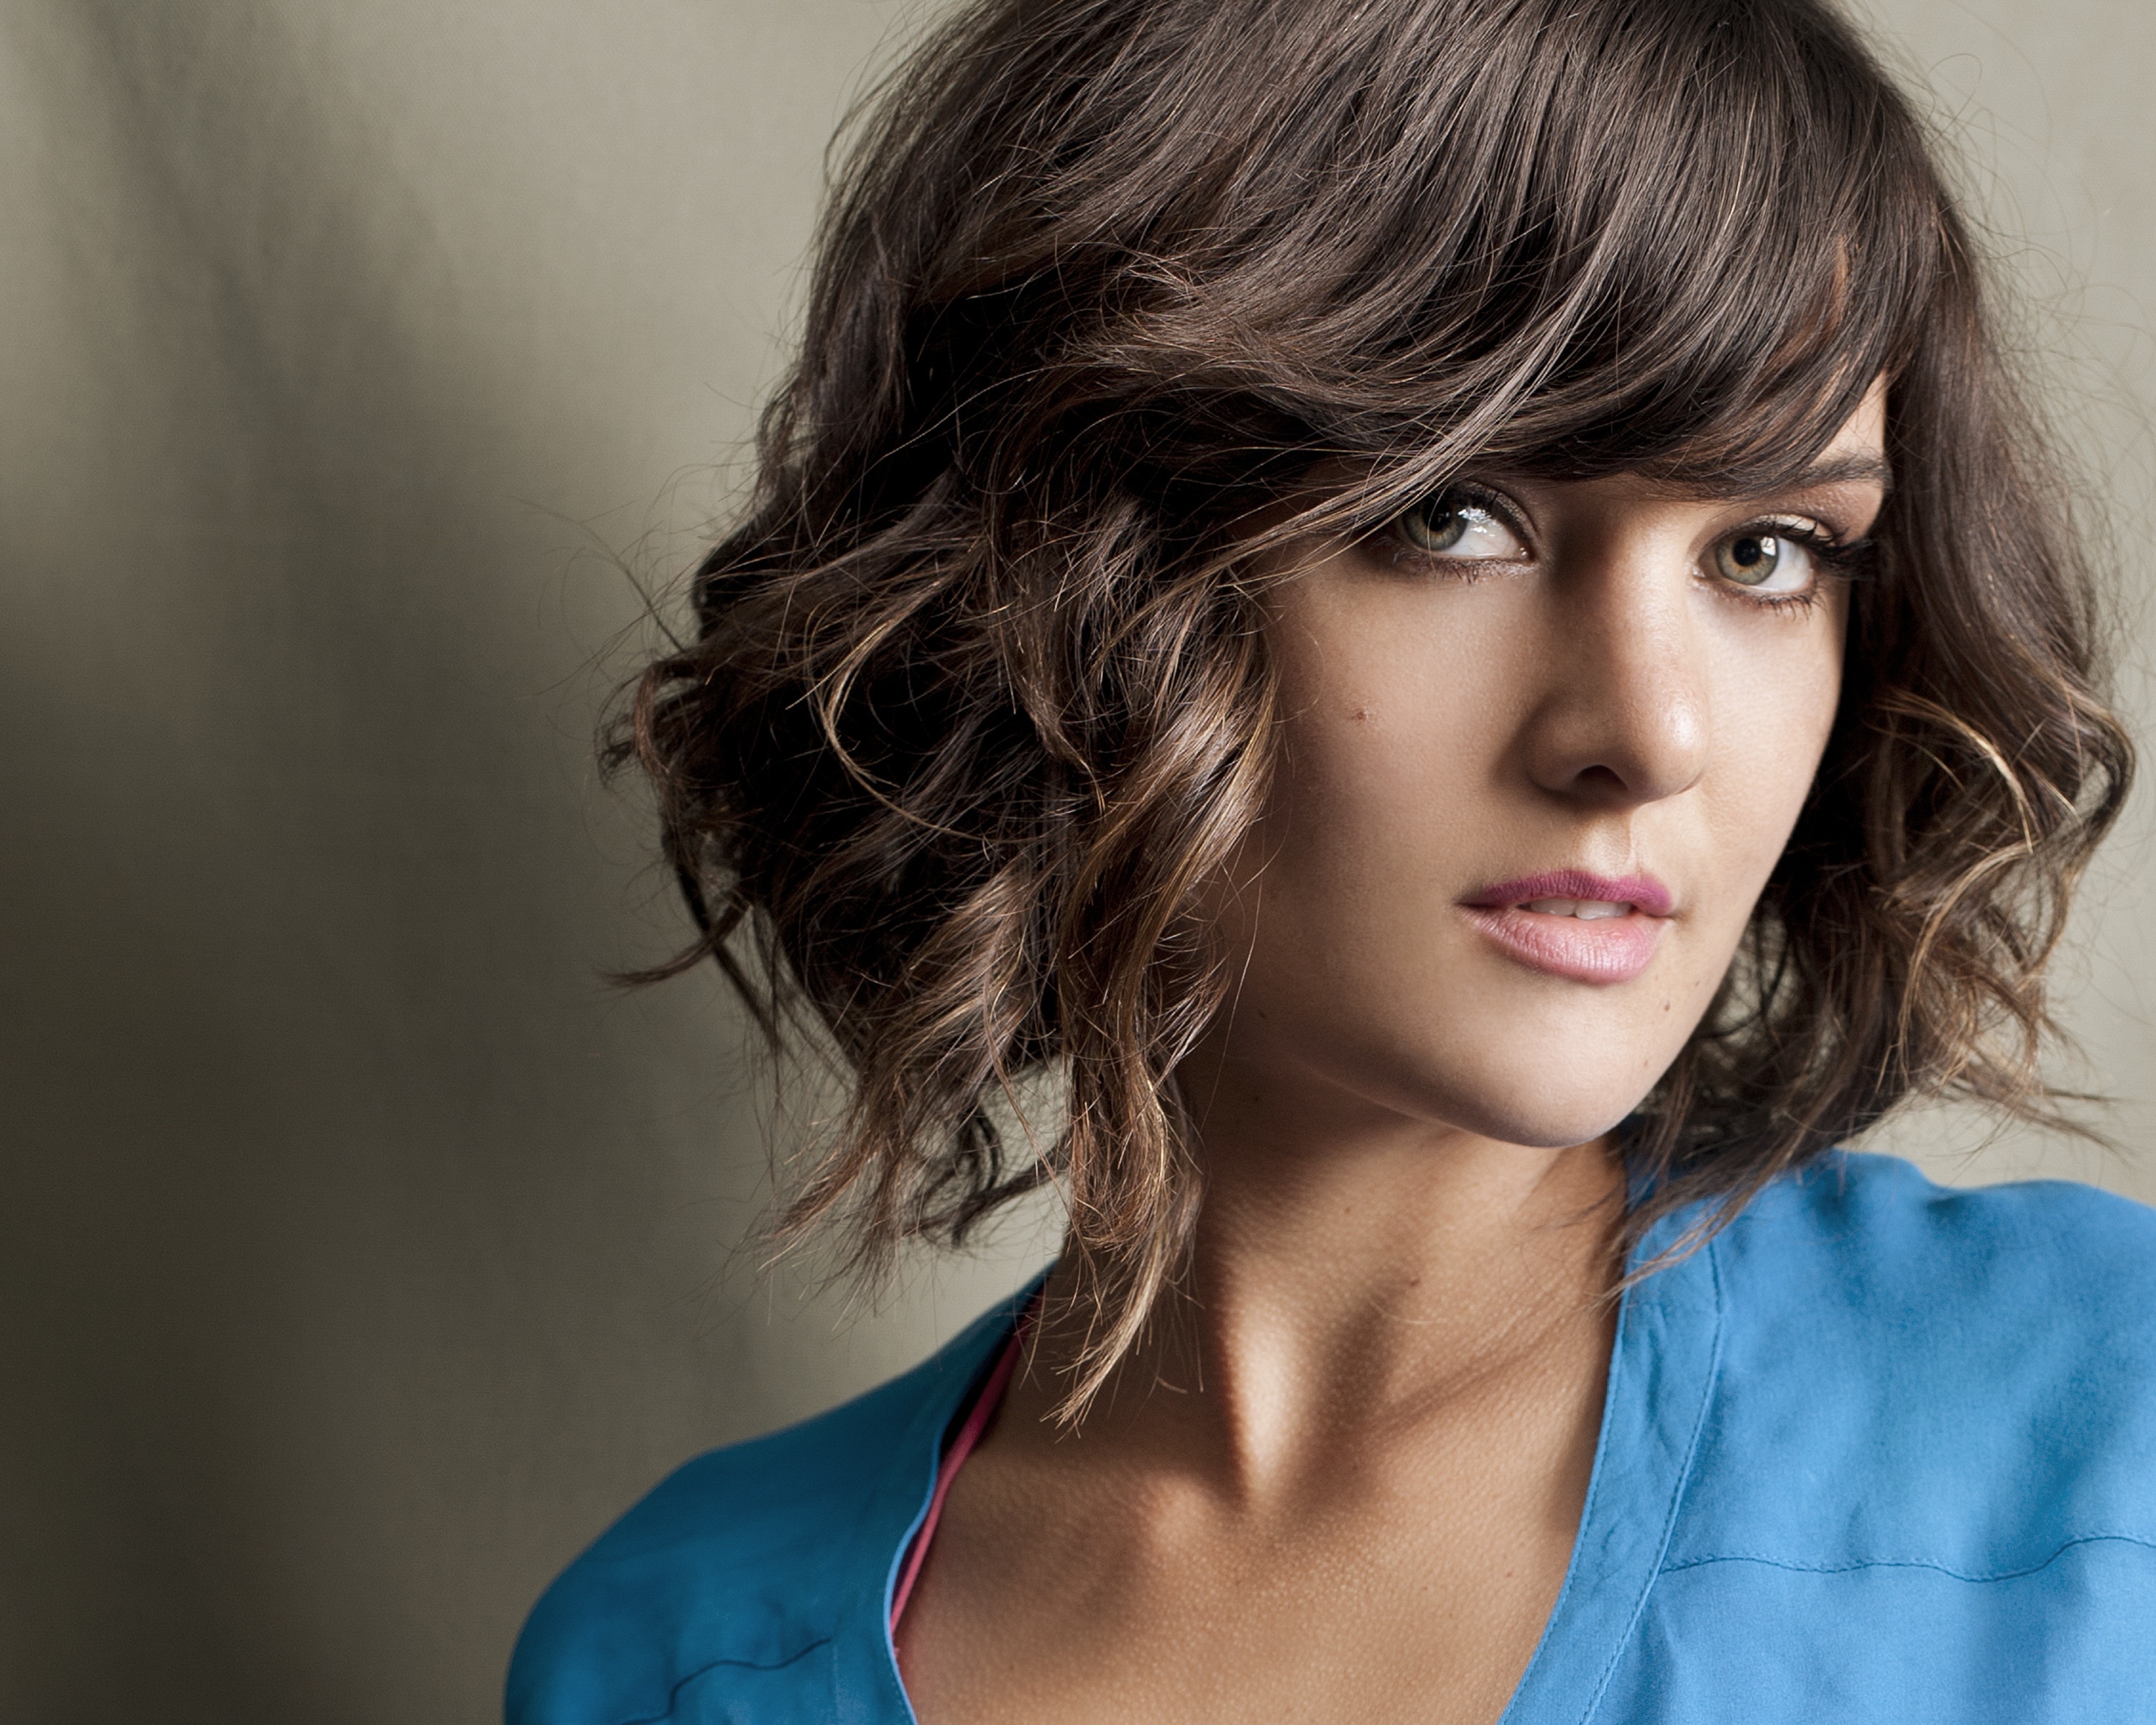 Frankie Shaw Wallpaper Image Photos Pictures Background